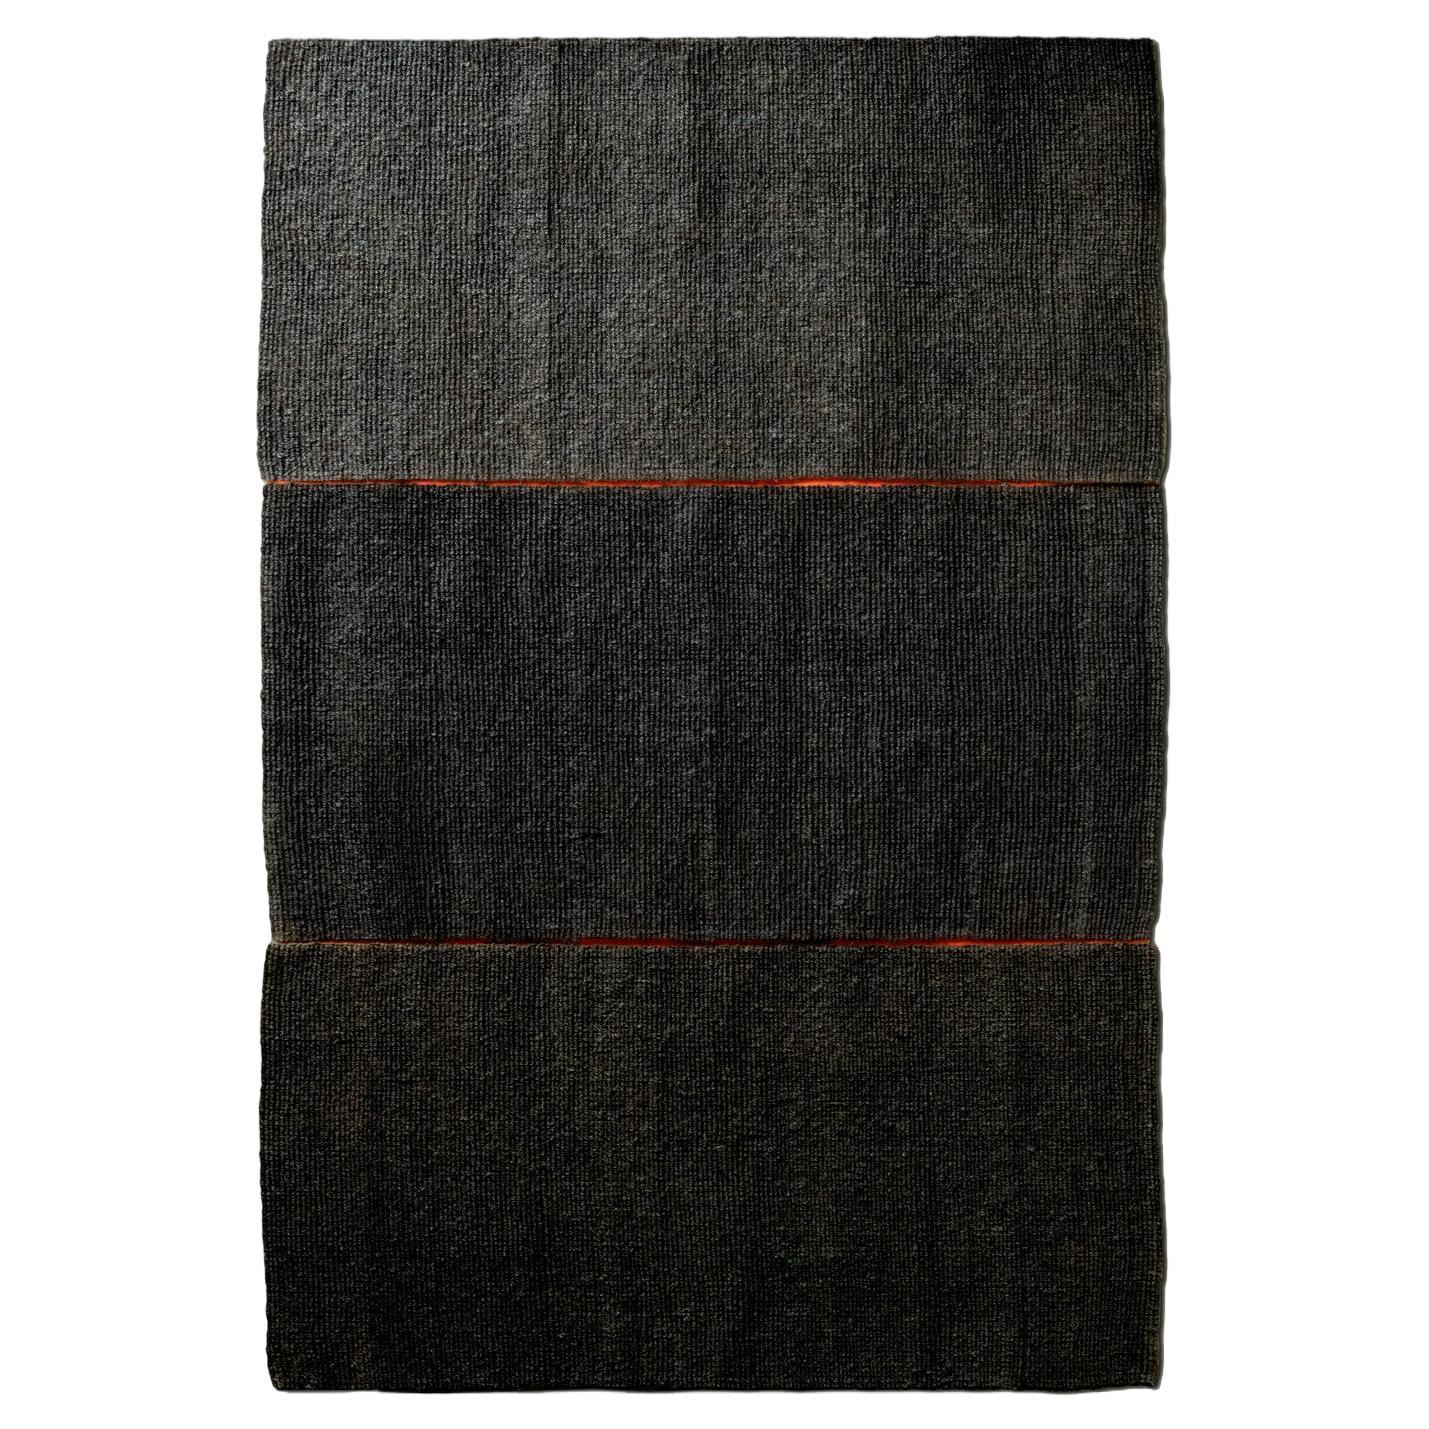 21st Cent Outdoor-Indoor Natural Black Coconut Rug by Deanna Comellini 195x285cm